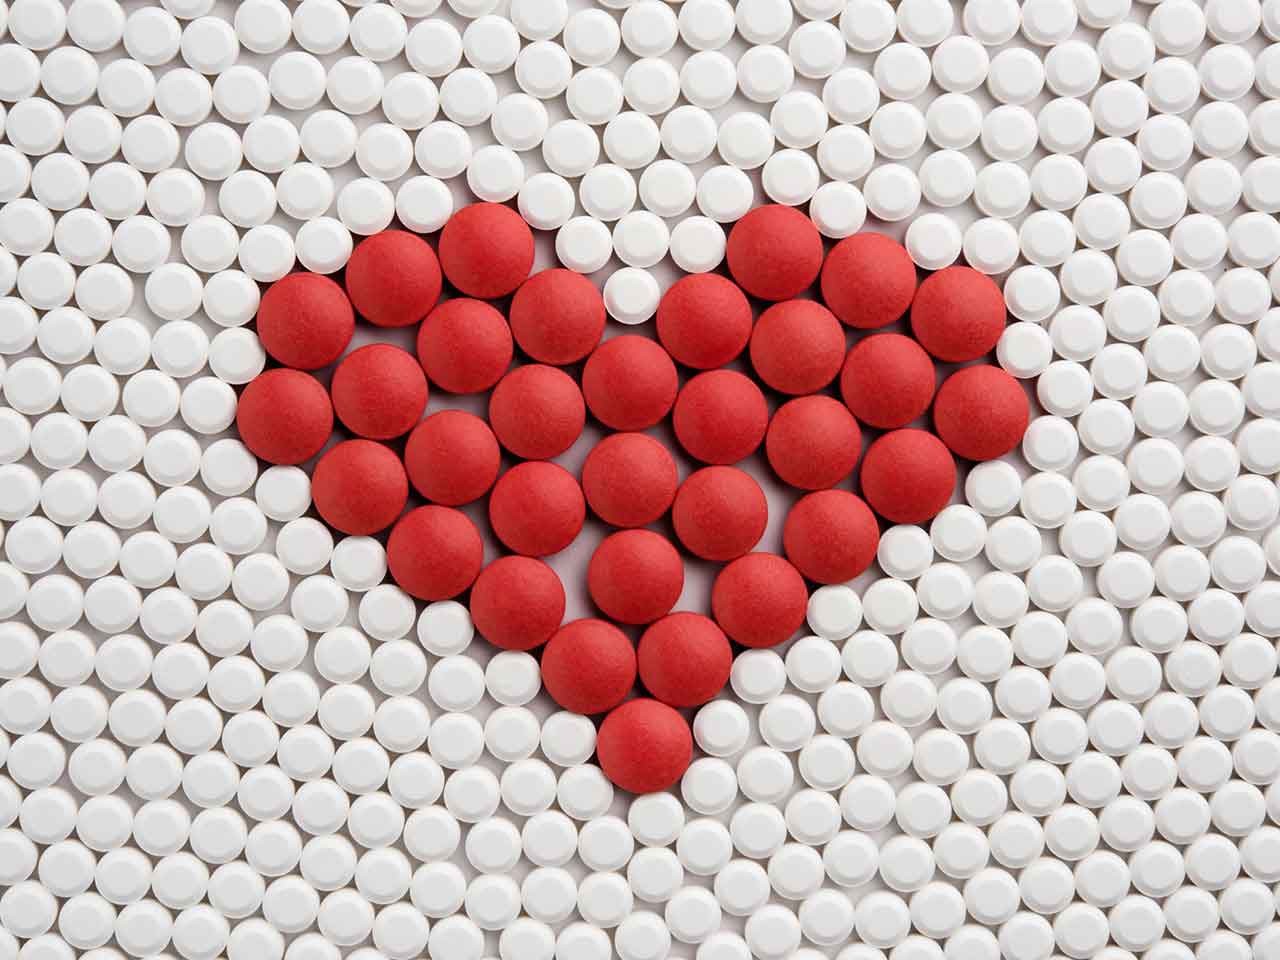 Statins help improve heart structure and function